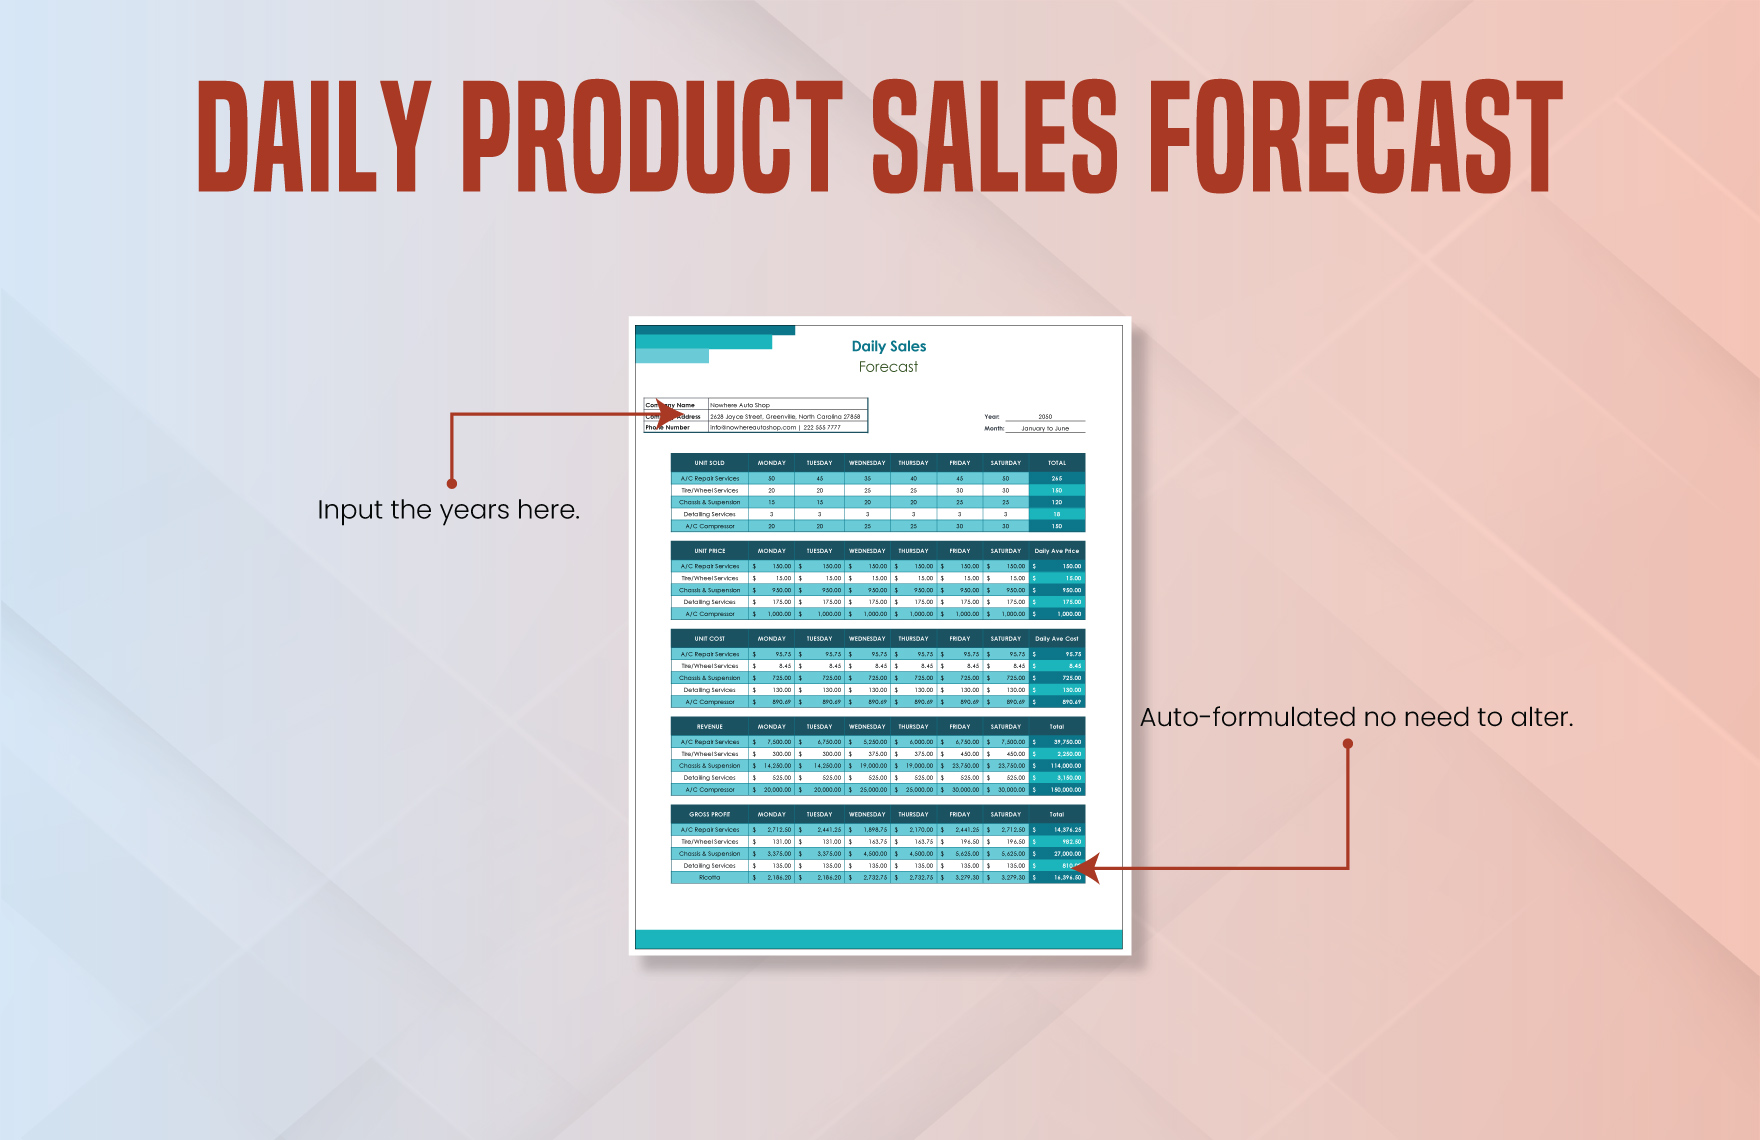 Daily Product Sales Forecast Template